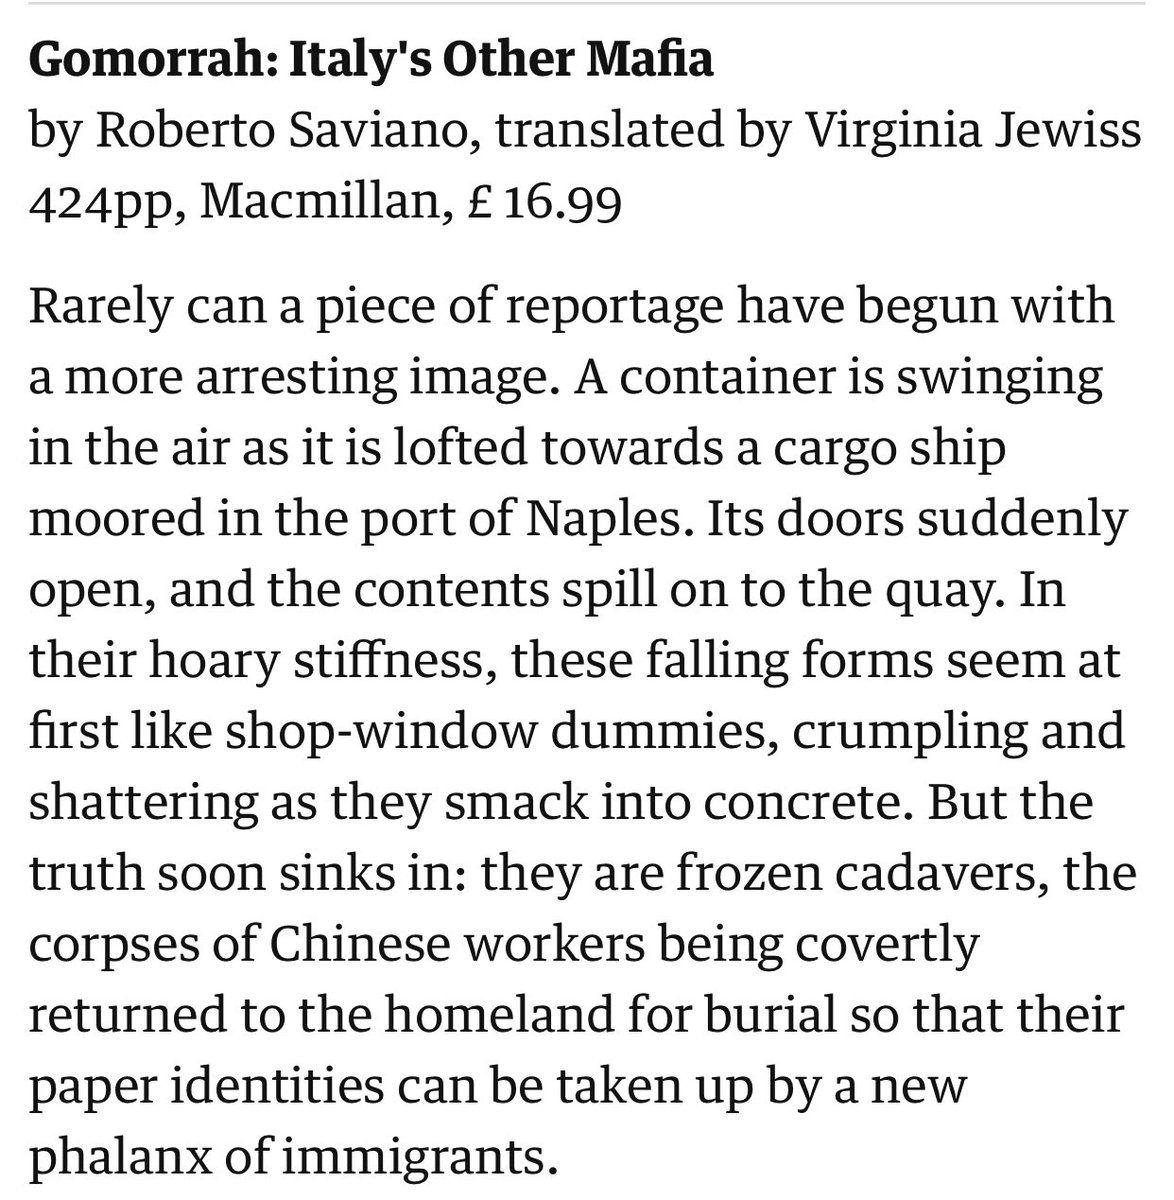 One representation of this was in Robert Saviano’s GOMORRAH, which describes similar (horrific) conditions for Chinese workers in sweatshops around Naples  https://www.theguardian.com/books/2008/jan/12/crime.mafia